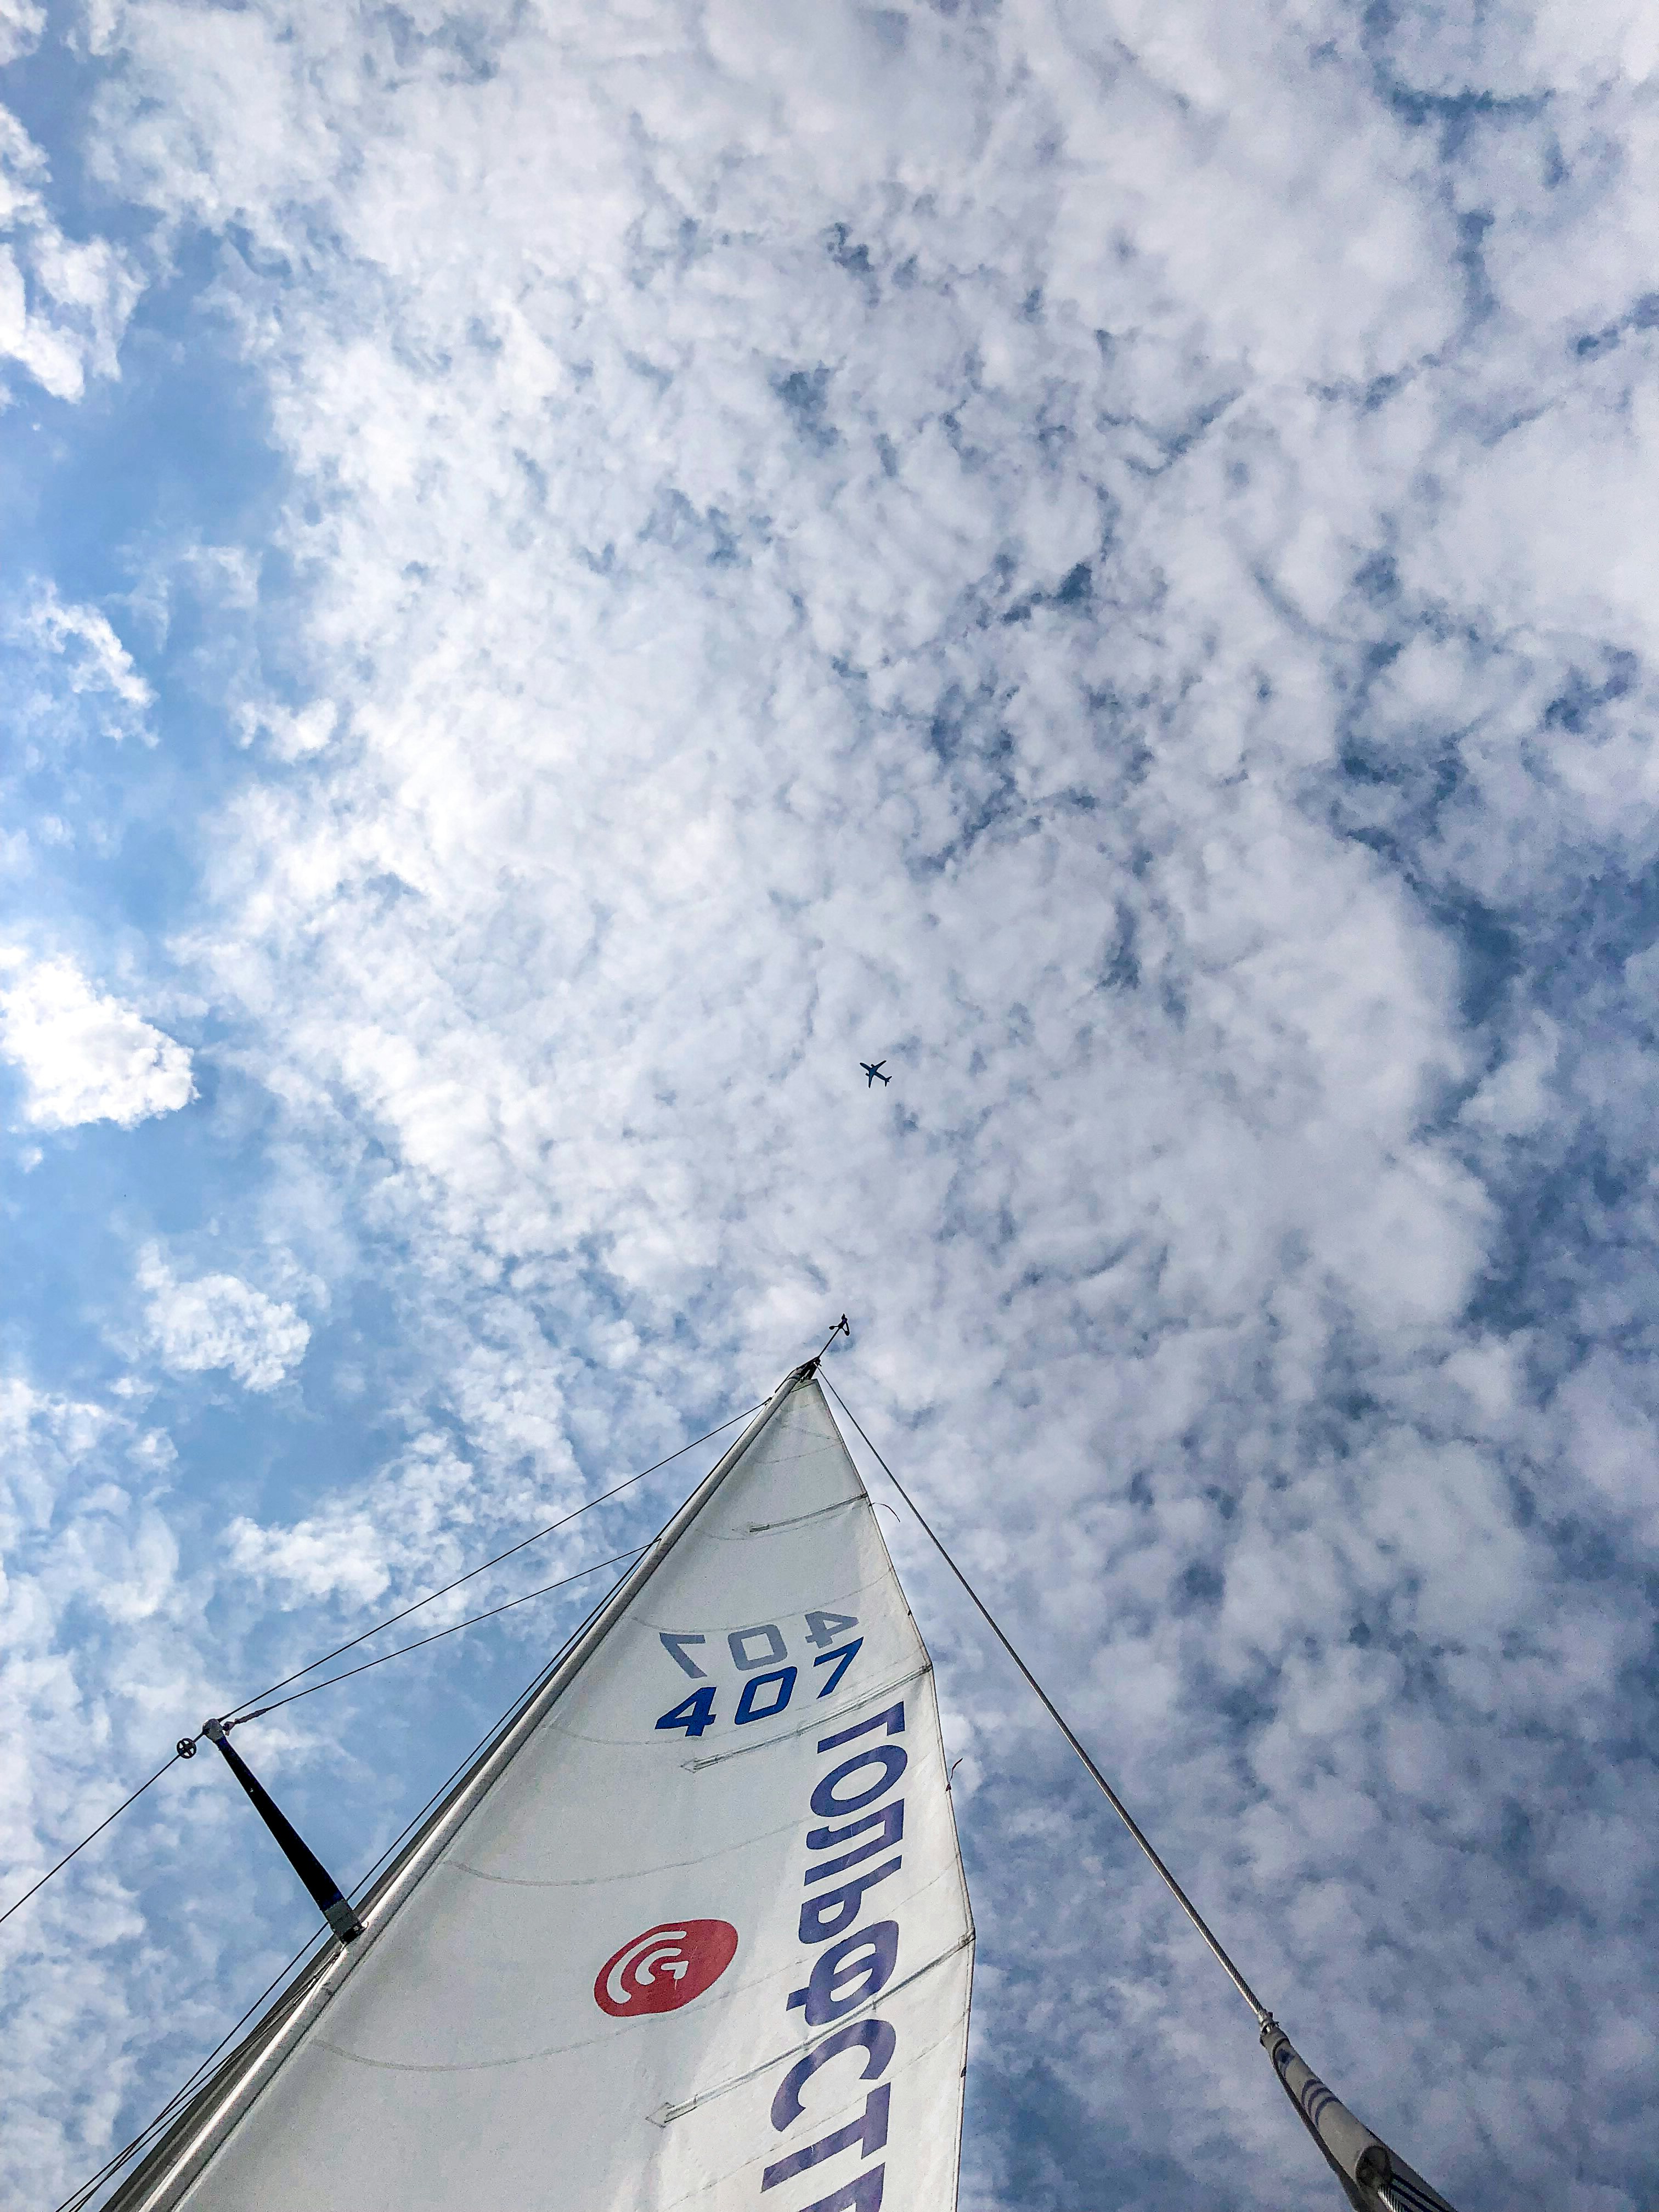 white sail boat on sea under blue sky and white clouds during daytime